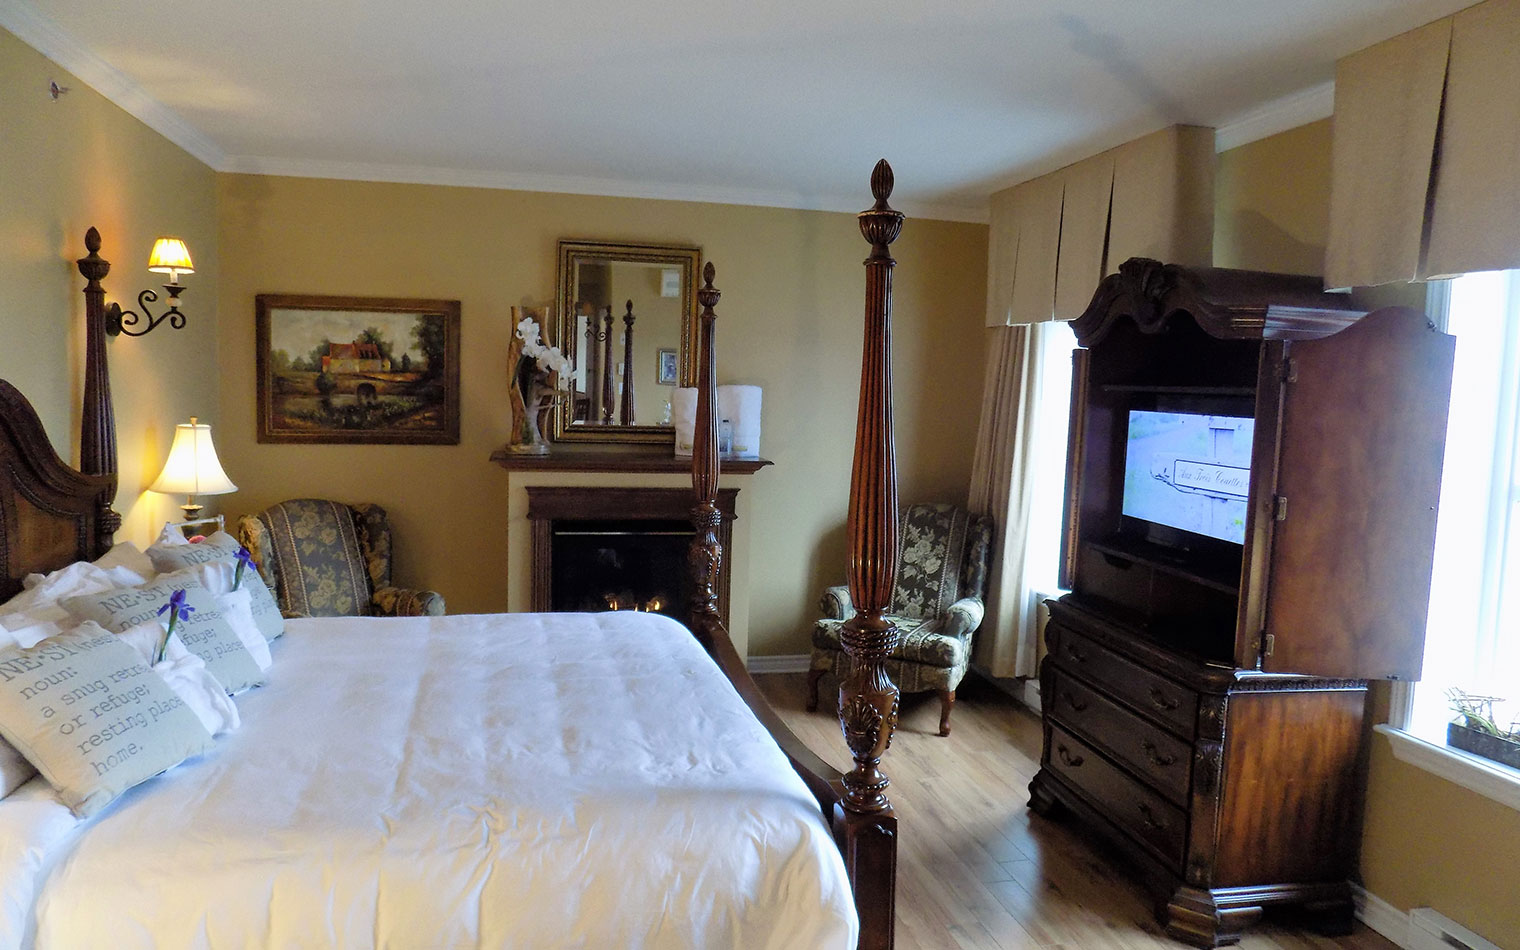 King bed, air conditioning, flat screen TV, free breakfast, gas fireplace - Laval, St-Eustache